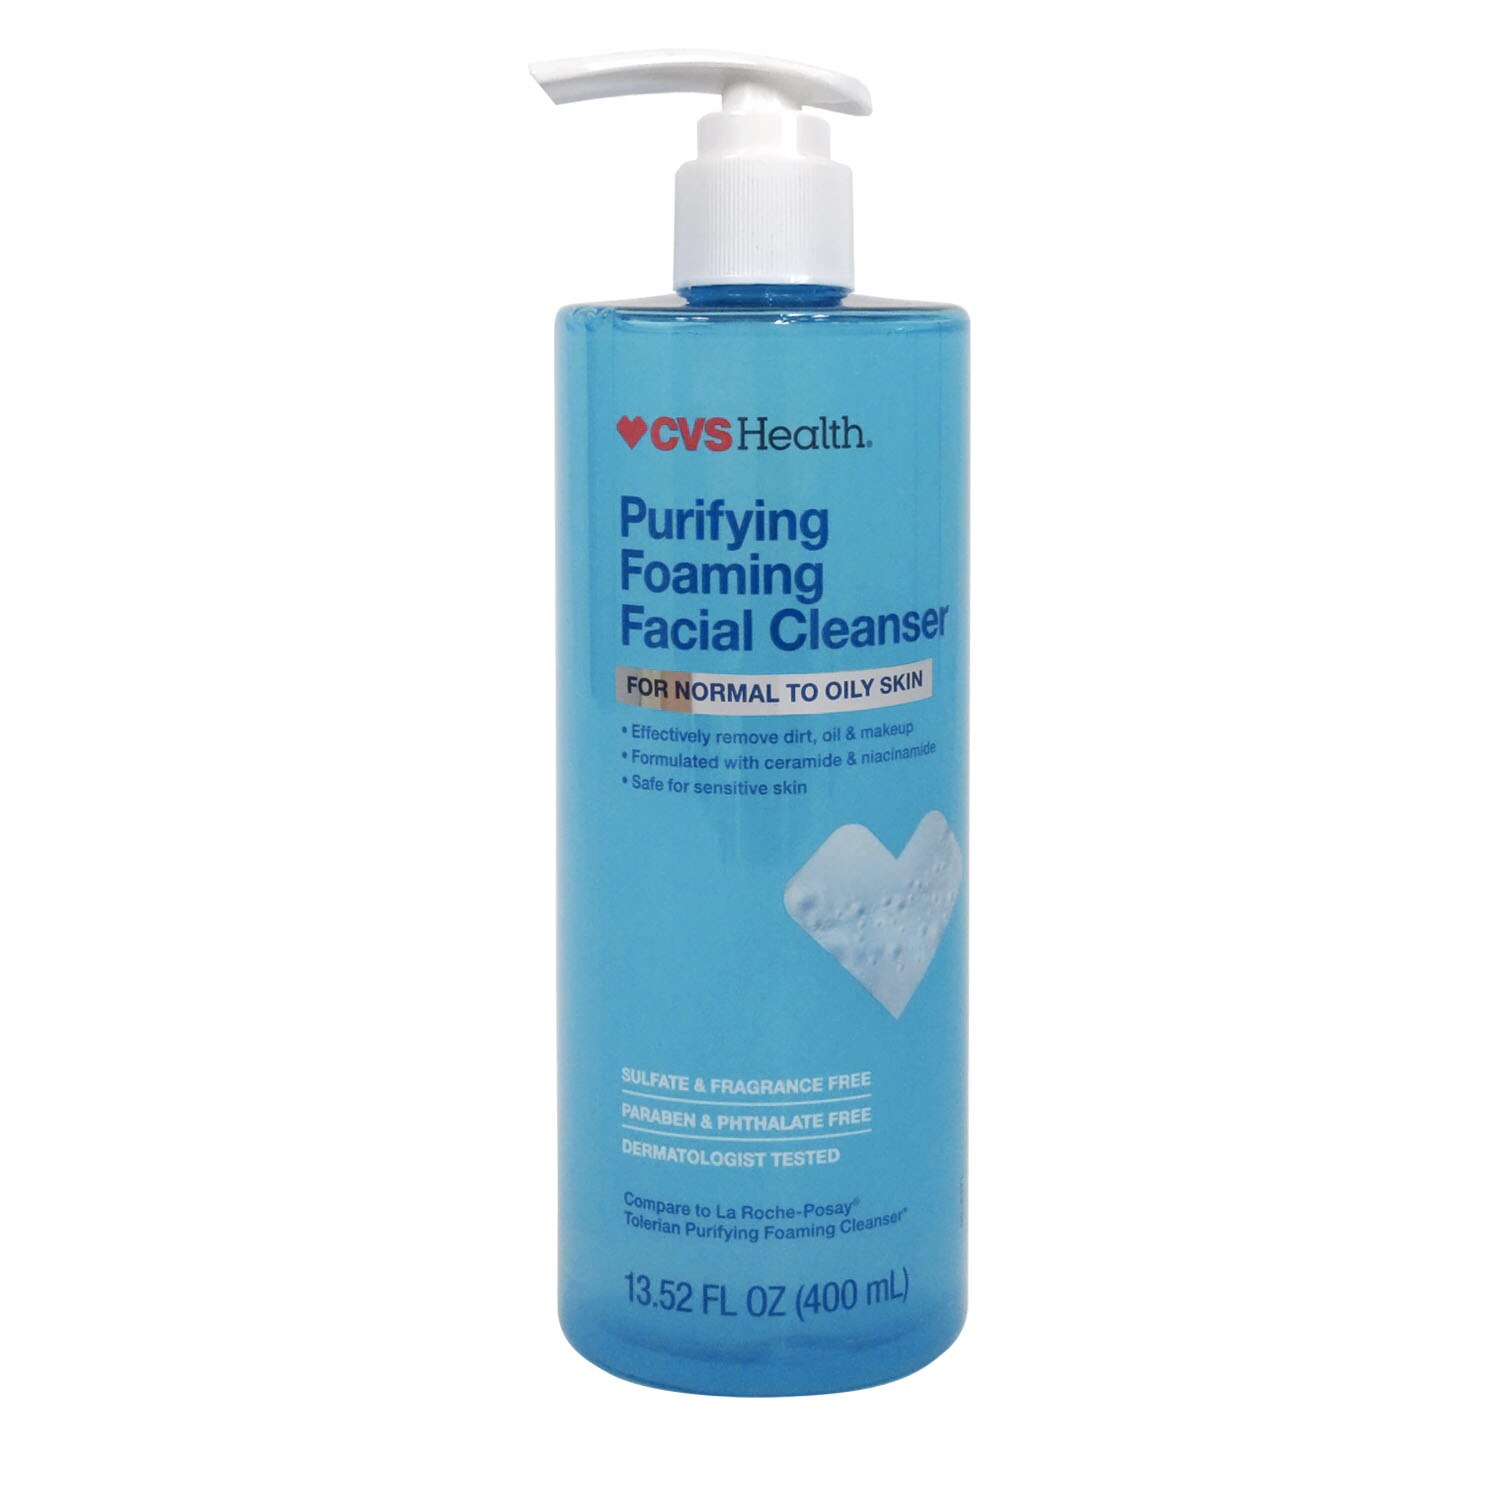 CVS Health Purifying Foaming Facial Cleanser for Normal to Oily Skin, 13.52 OZ